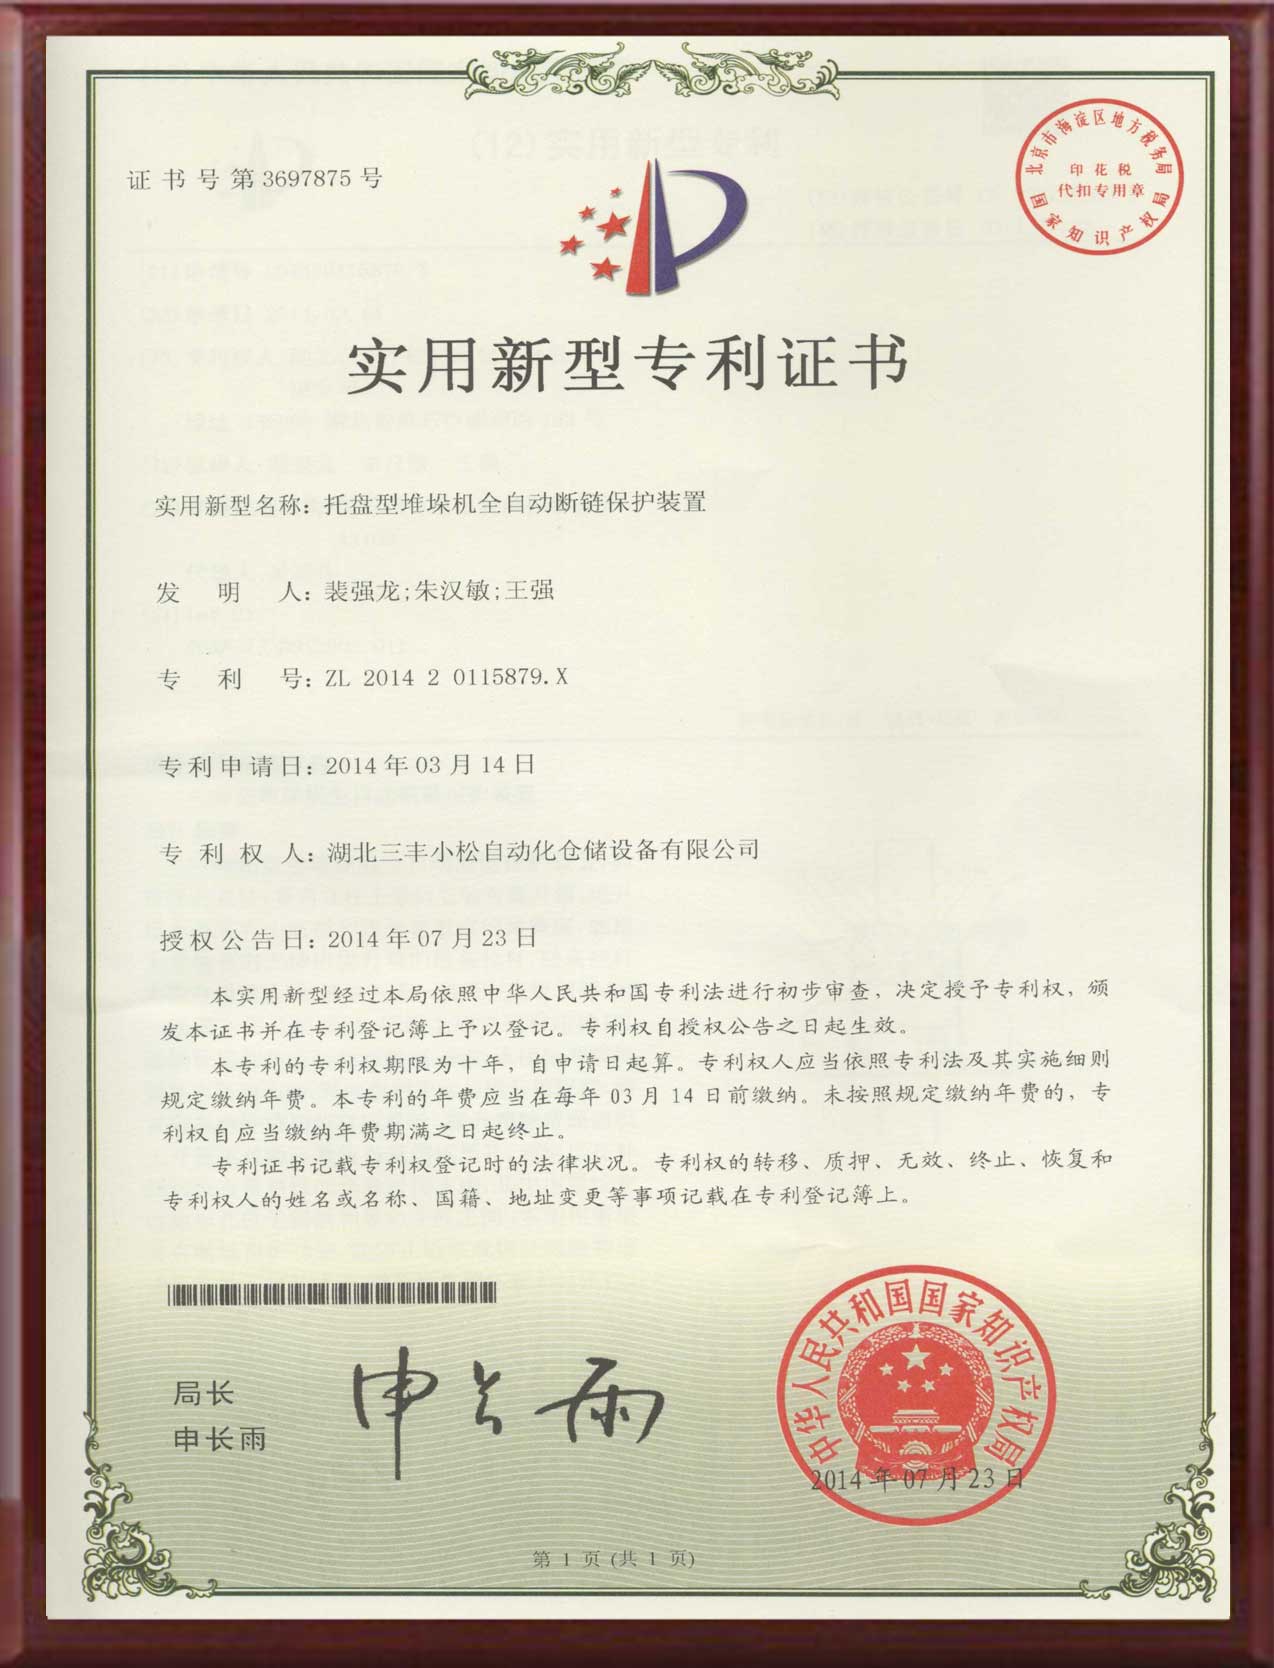 Broken chain protection patent certificate